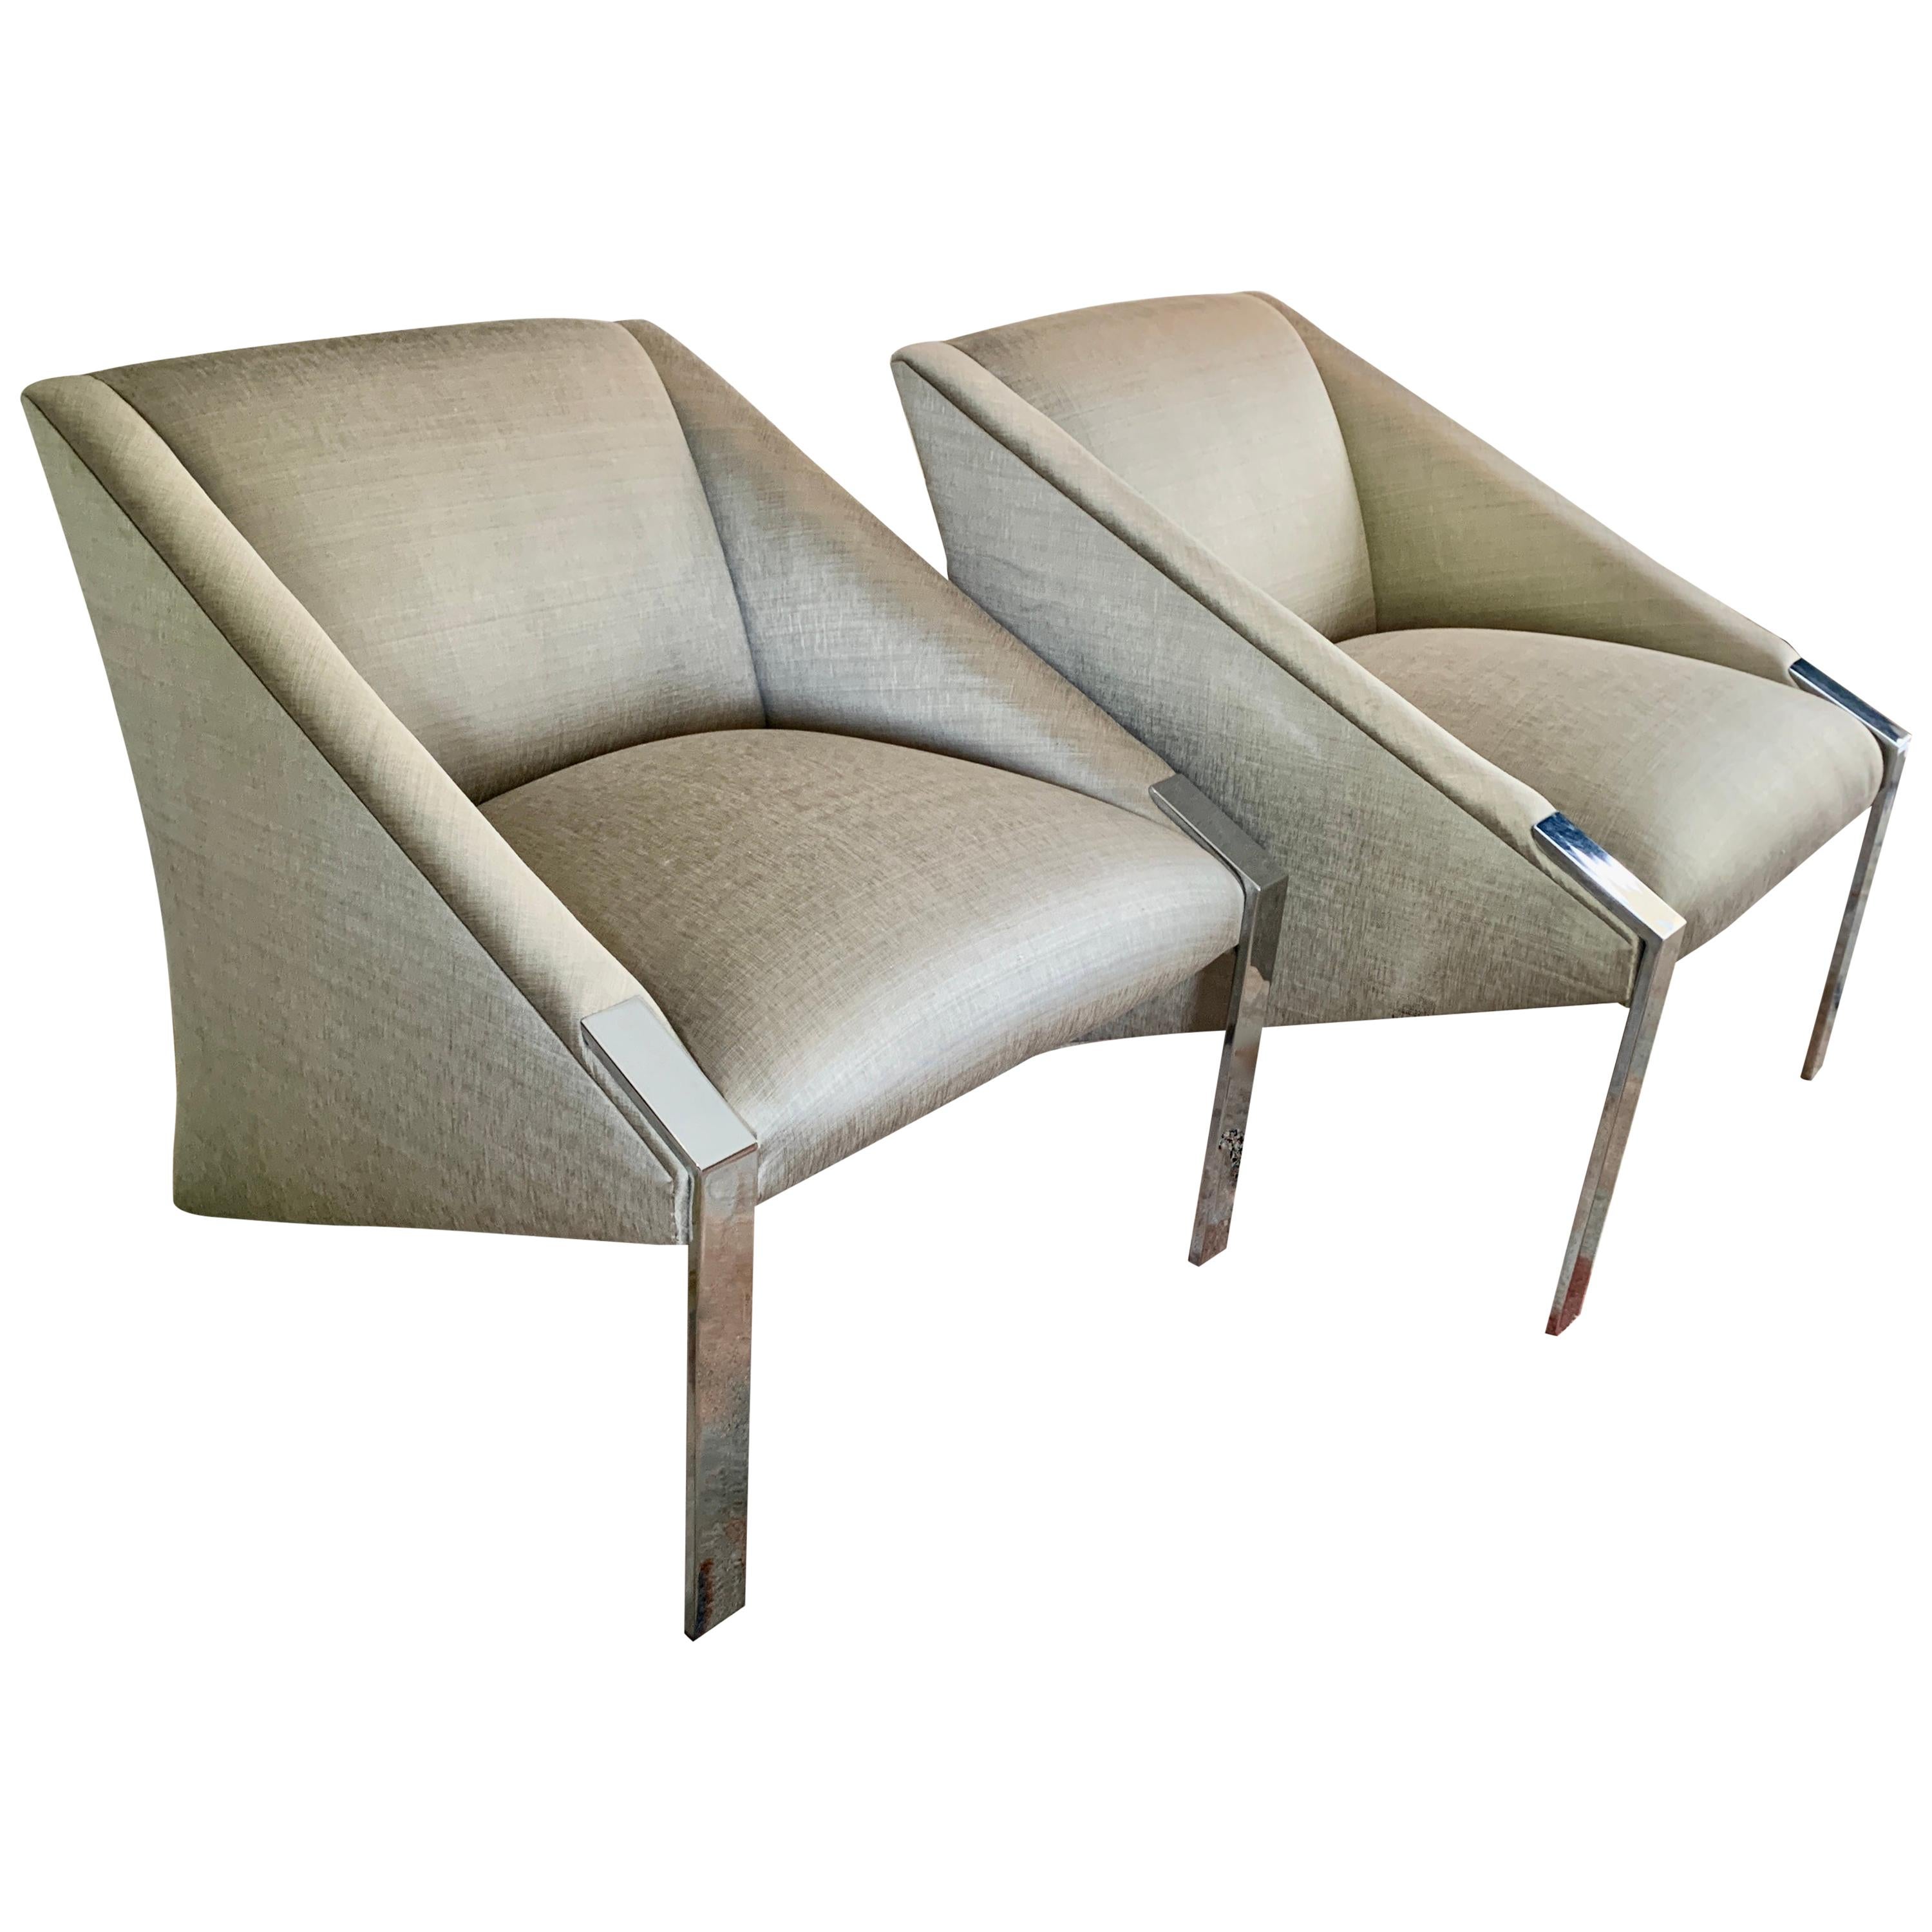 Pair of Andree Putman chrome side / lounge chairs. 

The pair rest on high polished chrome legs and slant back to meet the ground. They are reupholstered in a very chic silver tone woven silk fabric - wonderful for any room. The lines and form truly